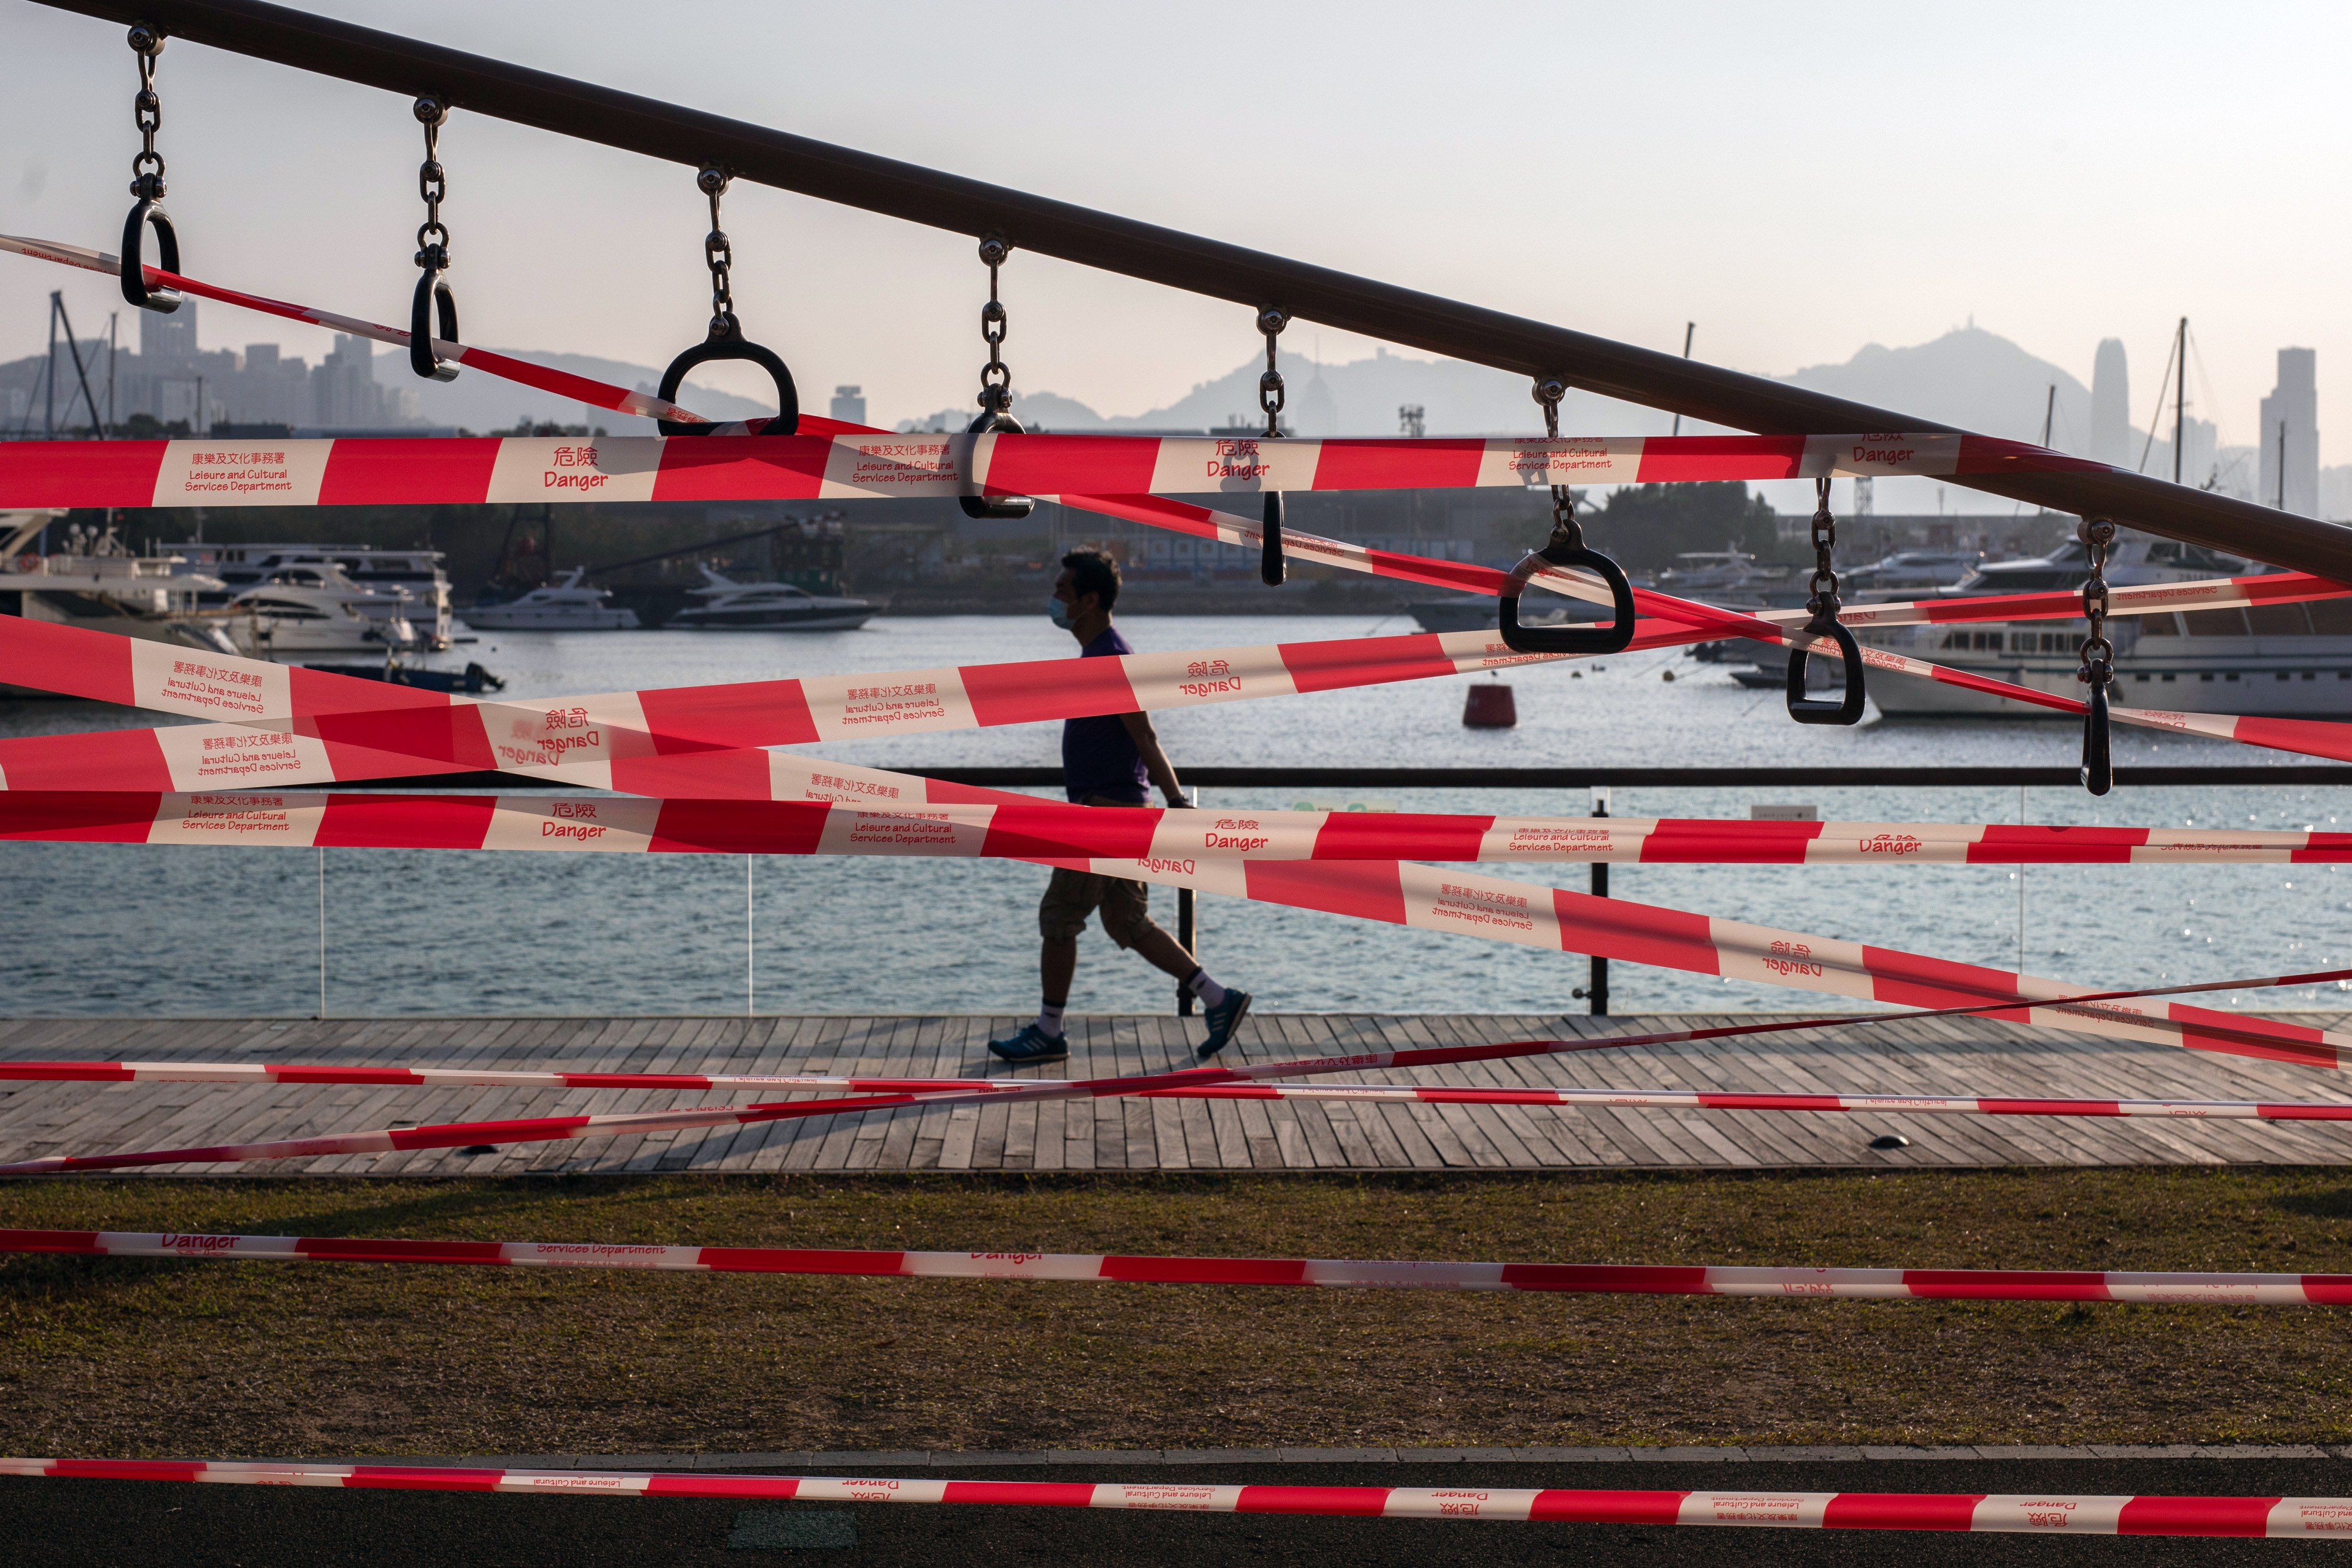 A pedestrian passes barrier tape cordoning off a gym facility, closed due to Covid-19 restrictions, at the Kwun Tong Promenade in Hong Kong on March 3. Officials in the city must have the courage to do what it takes to bring the virus under control. Photo: Bloomberg